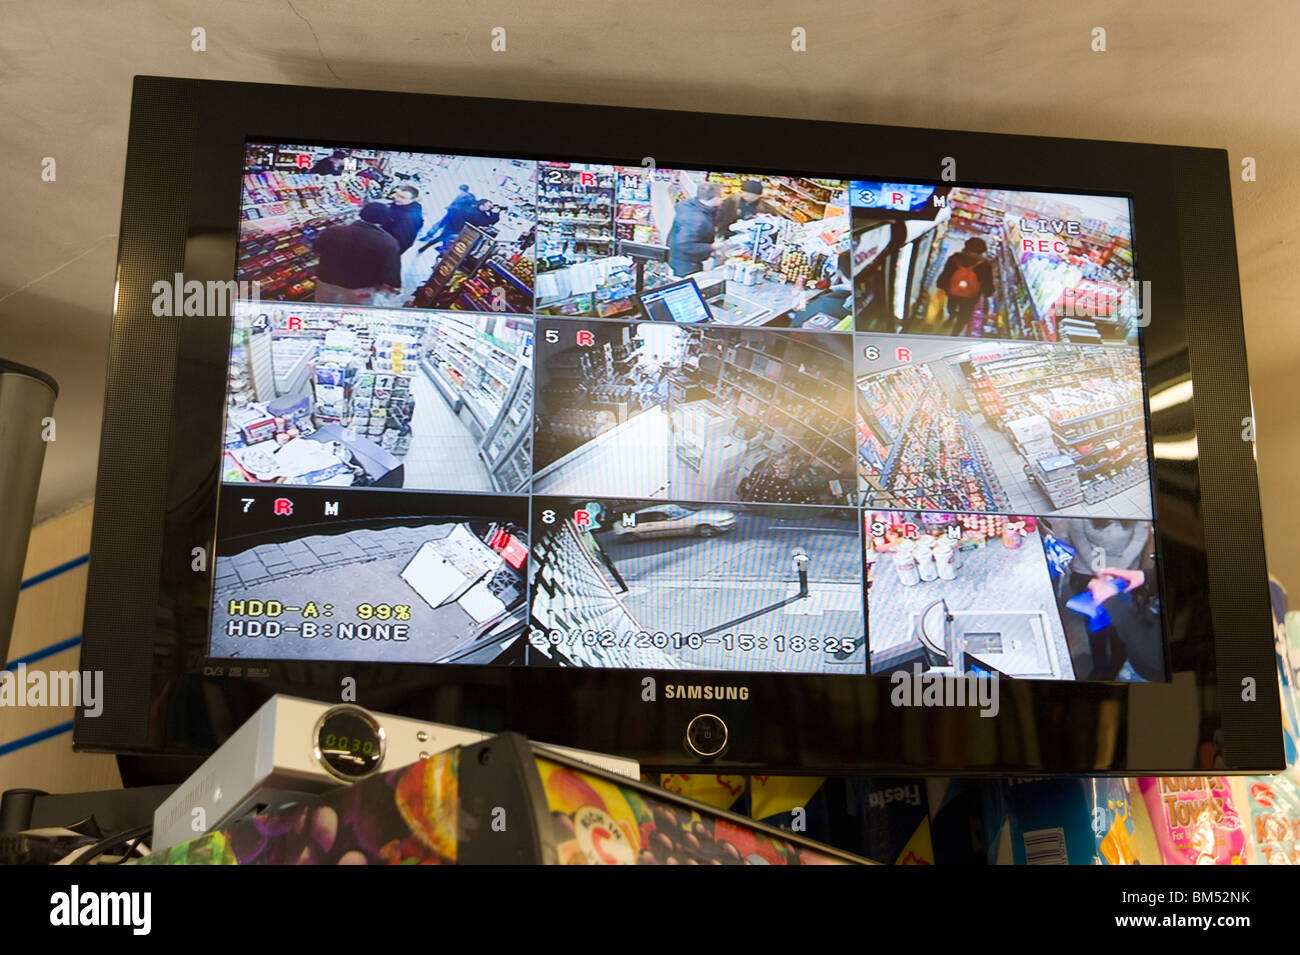 Local grocery shop's screen of the CCTV cameras around the store, UK Stock Photo